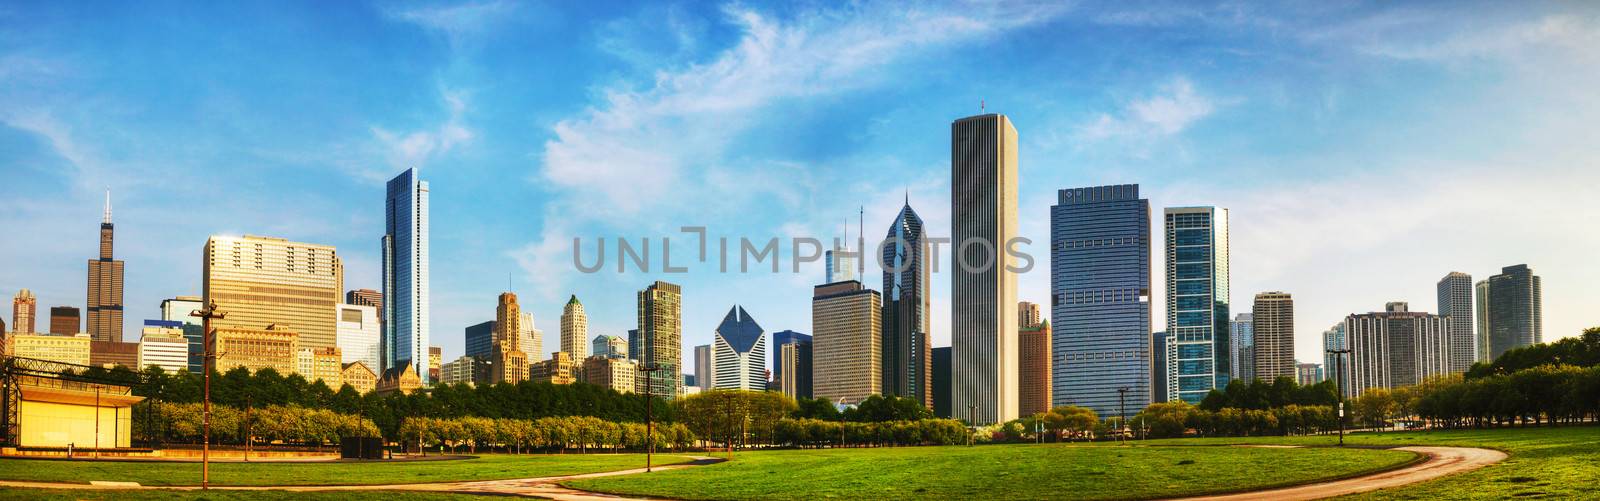 Downtown Chicago as seen from Grant park in the morning